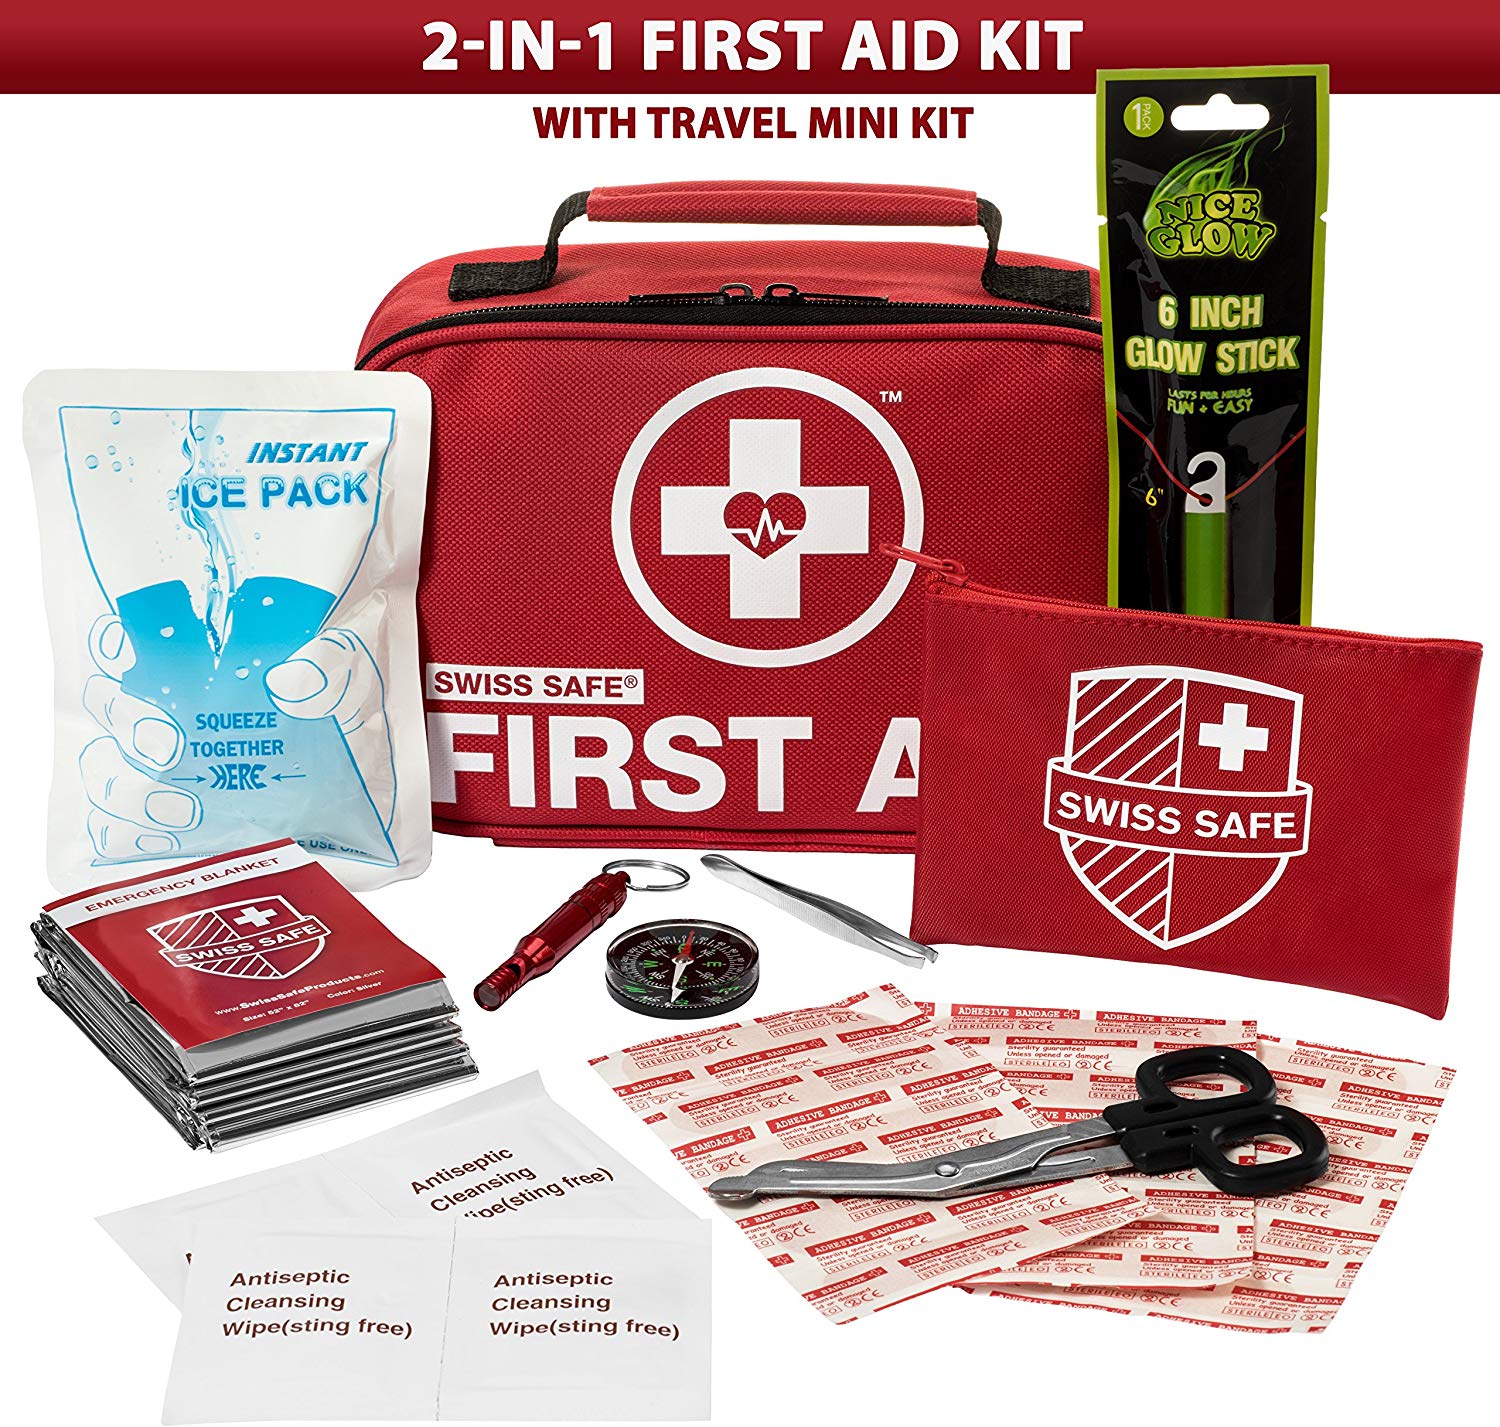 best-selling-first-aid-kits-you-can-get-on-amazon-today-tech-times